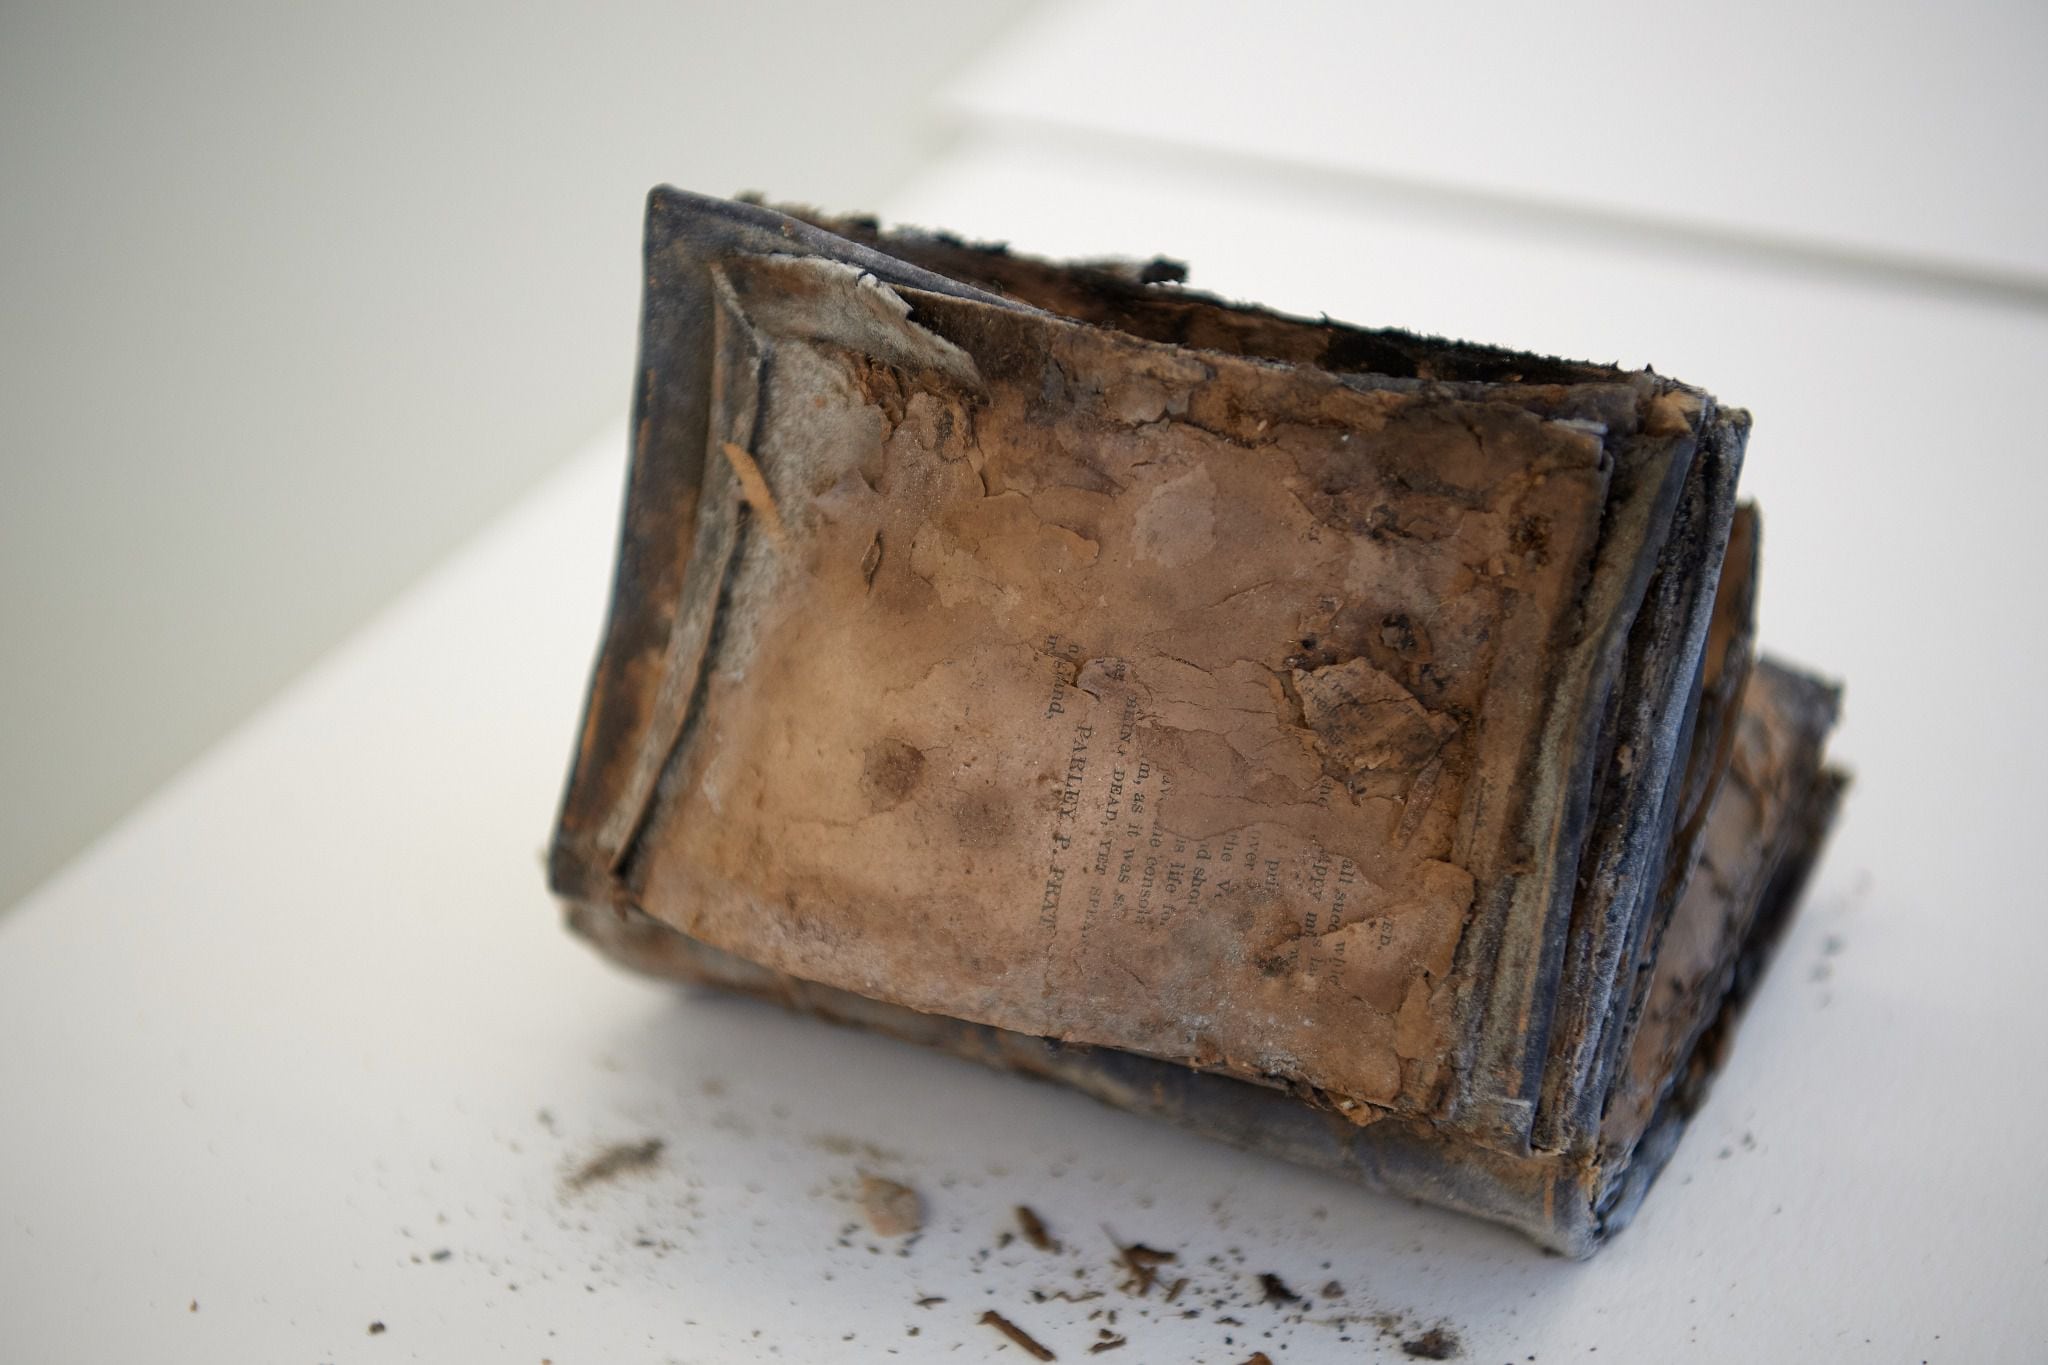 (photo courtesy The Church of Jesus Christ of Latter-day Saints) A copy of Parley P. PrattÕs "A Voice of Warning," fused with a copy of the Book of Mormon, were found inside the capstone of the Salt Lake Temple.